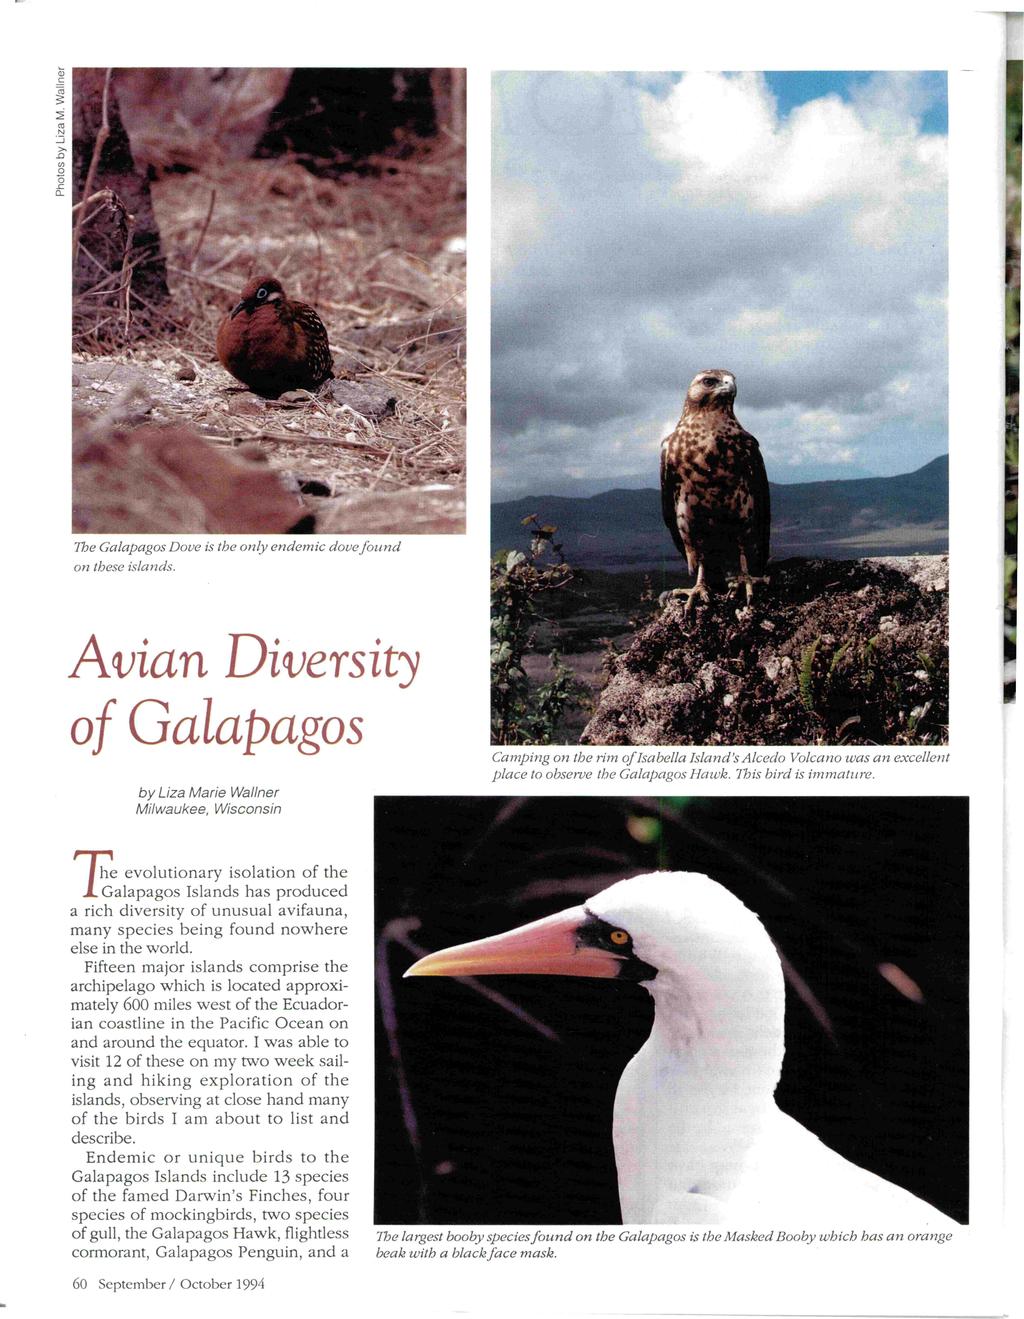 The Galapagos Dove is the only endemic dove found on these islands.